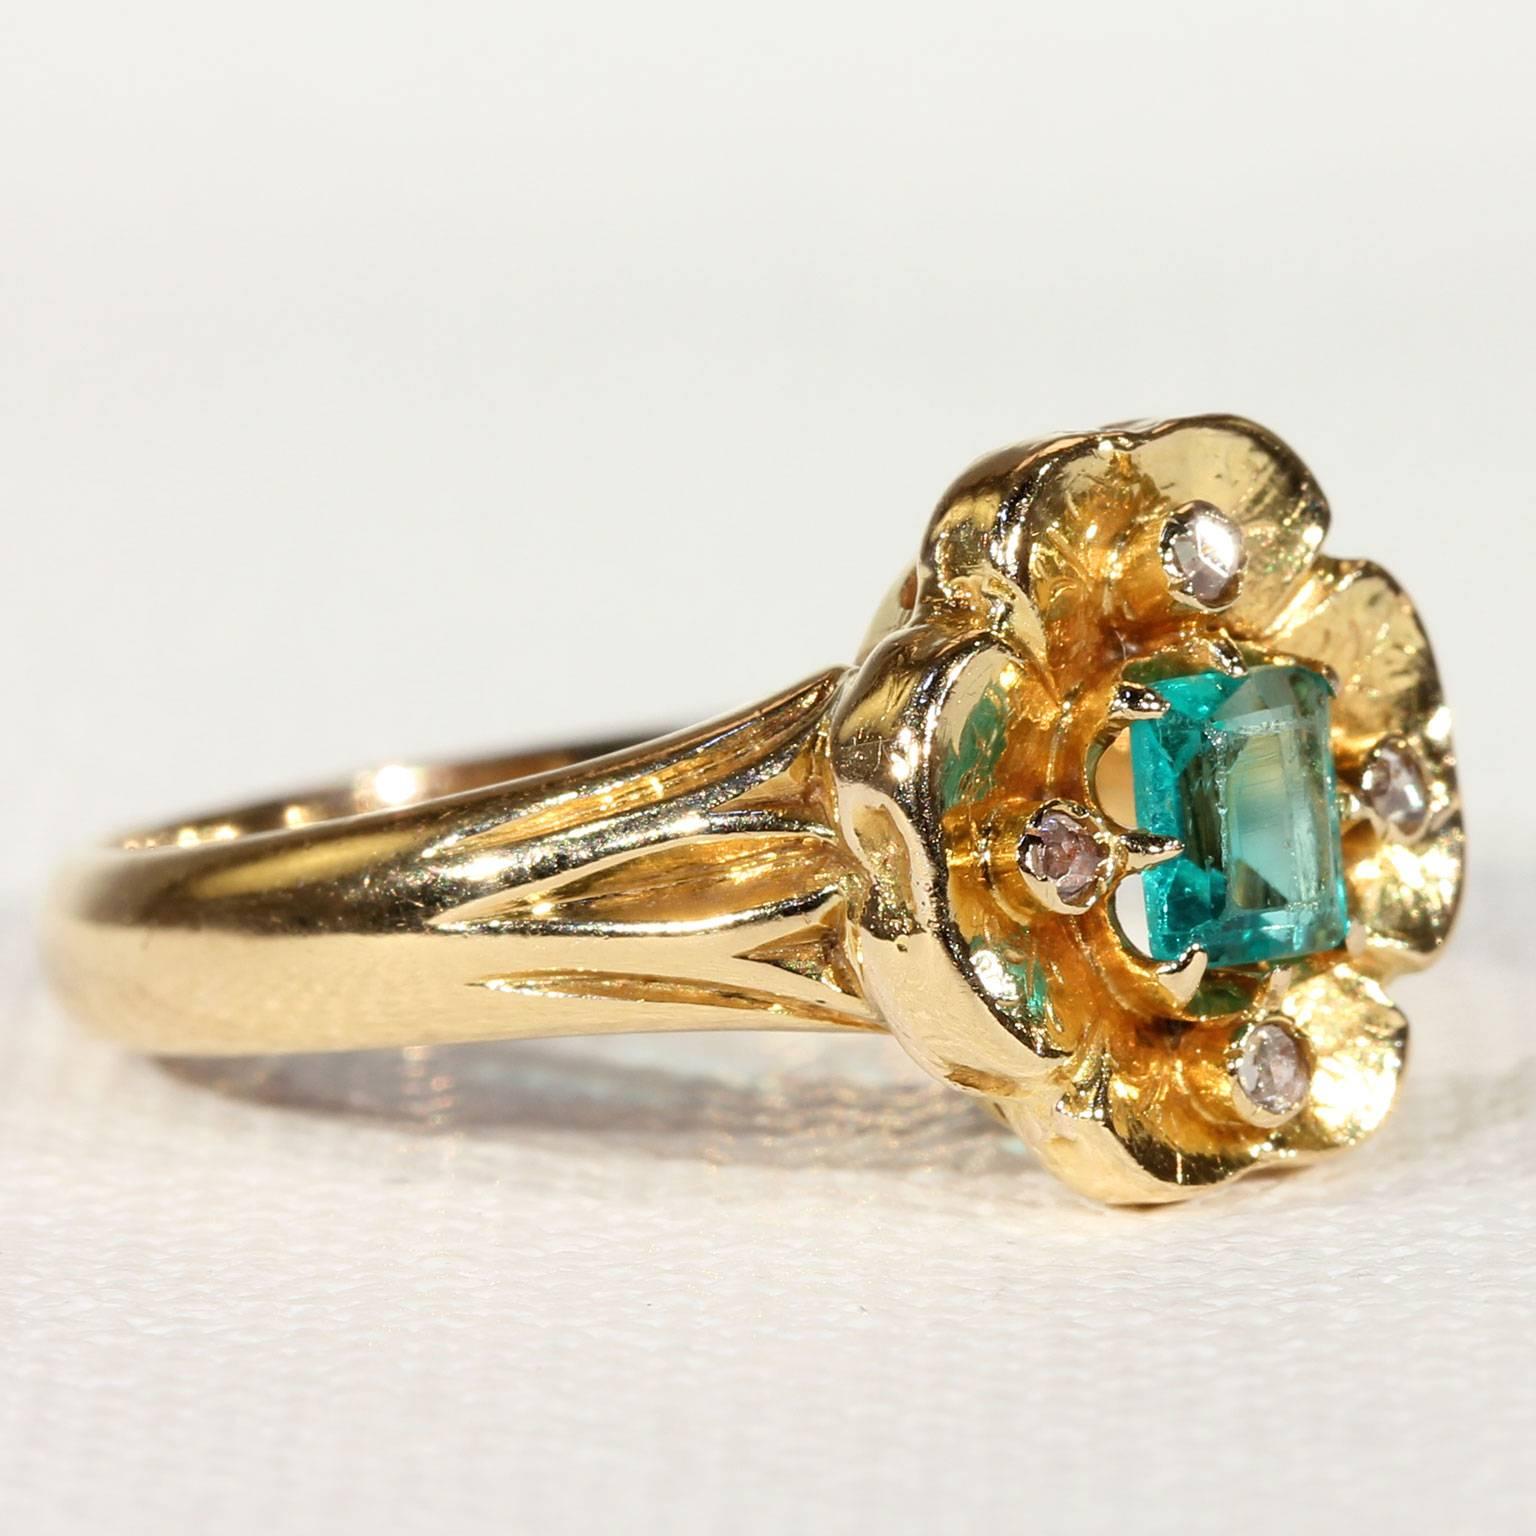 This gorgeous Victorian ring is set with a glowing hand cut emerald of lovely clarity with a stunning ‘middle of the Amazon’ green color. The gem forms the center of a pansy flower or maybe a four-leafed clover, each petal is delicately engraved and